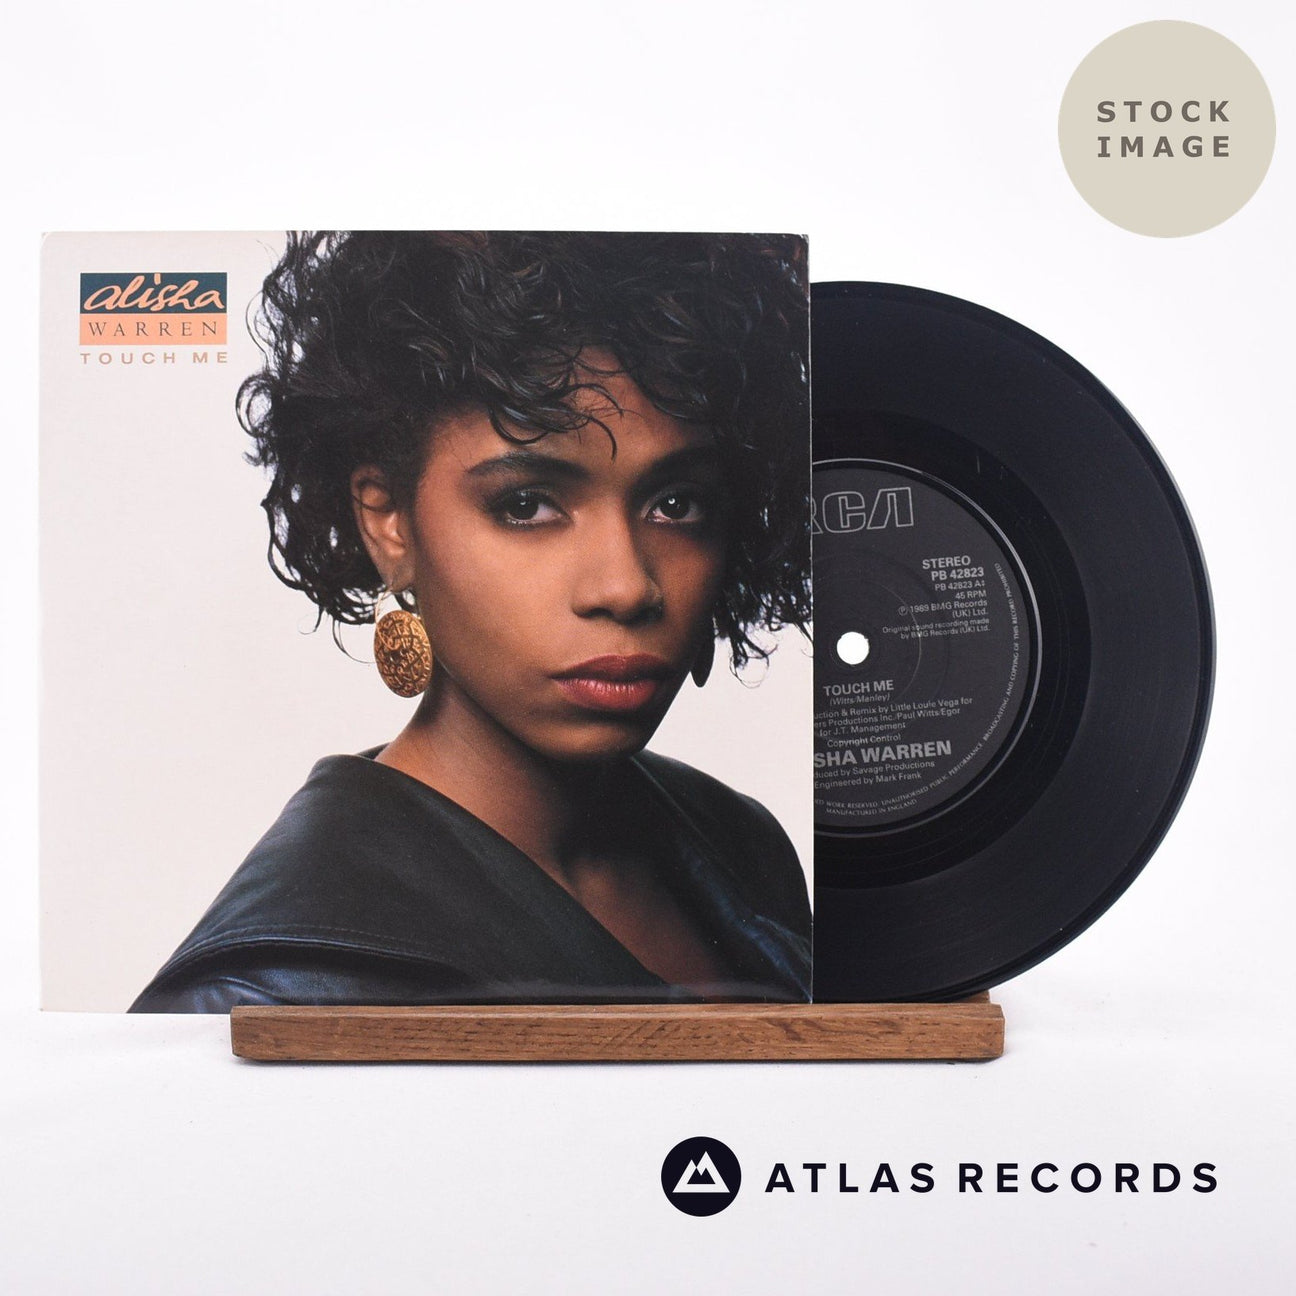 Alisha Warren Touch Me 7" Vinyl Record - Sleeve & Record Side-By-Side